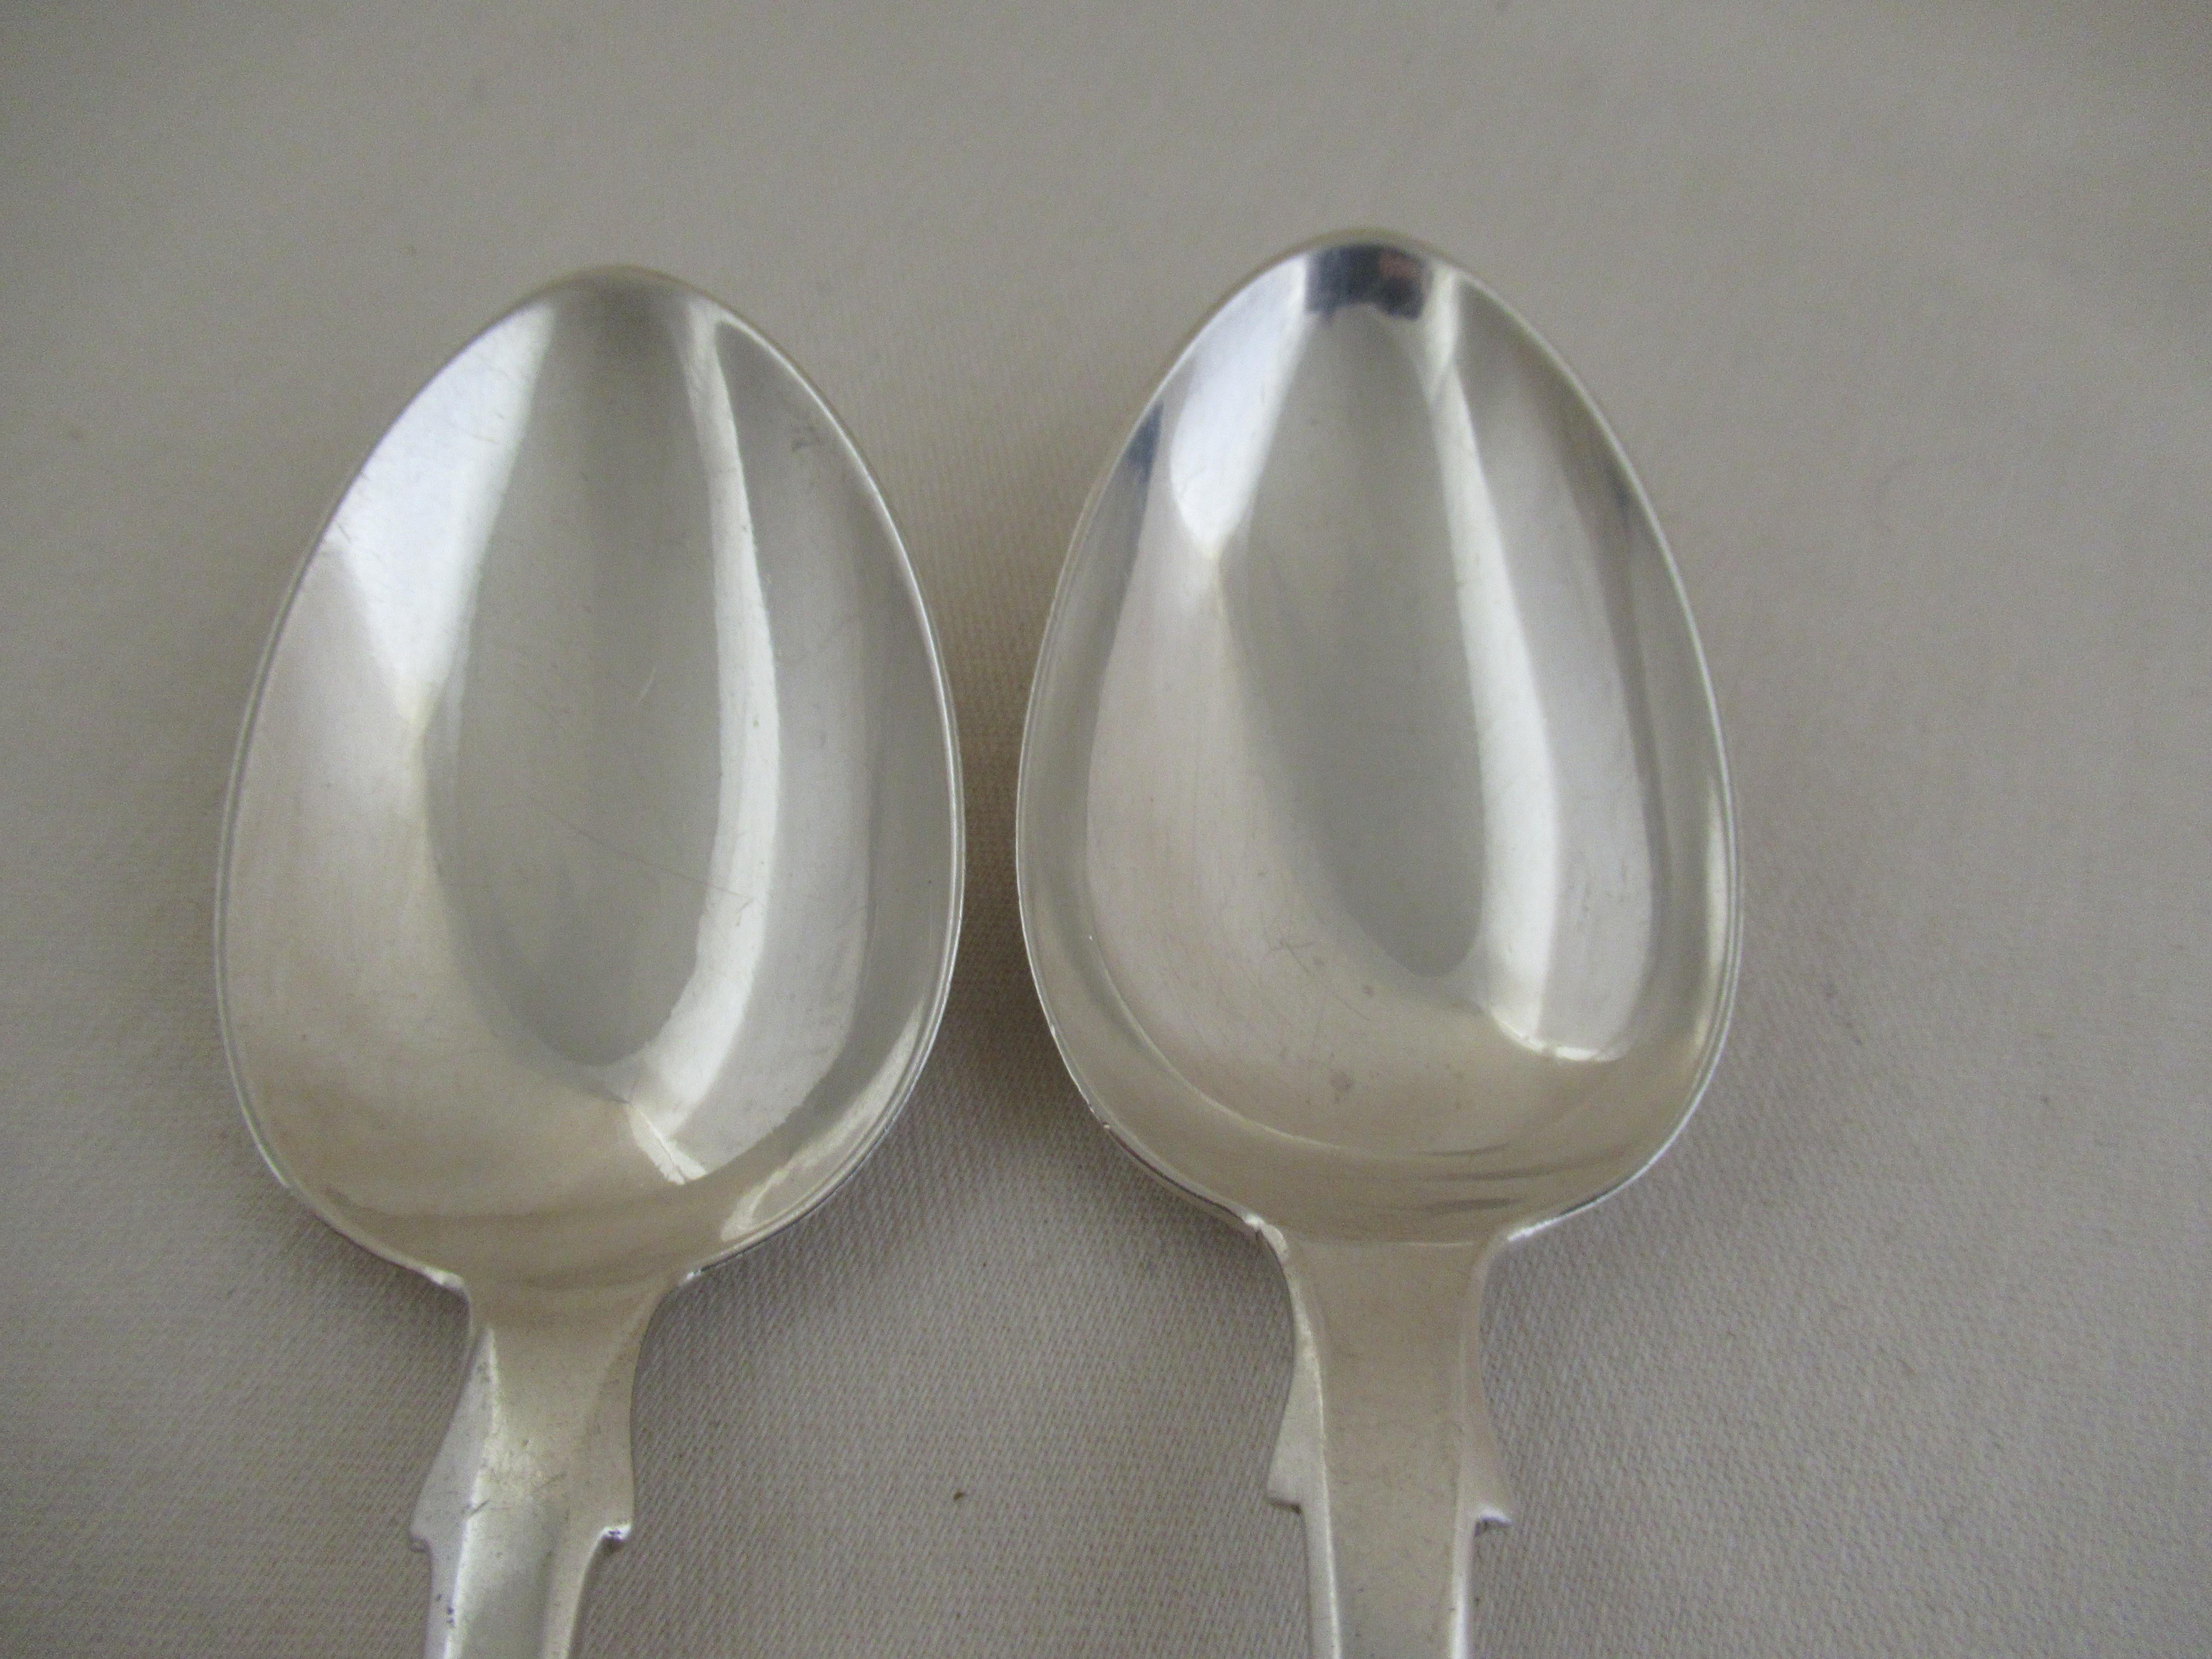 Sterling Solid Silver - Pair of Fiddle Pattern Dessert Spoons
Made in 1844, ( 179 years old), by William Eaton.
A full set of hallmarks applied by the London Assay Office:- 
 Leopard`s head - London Assay Office mark.
 Lion - Sterling silver